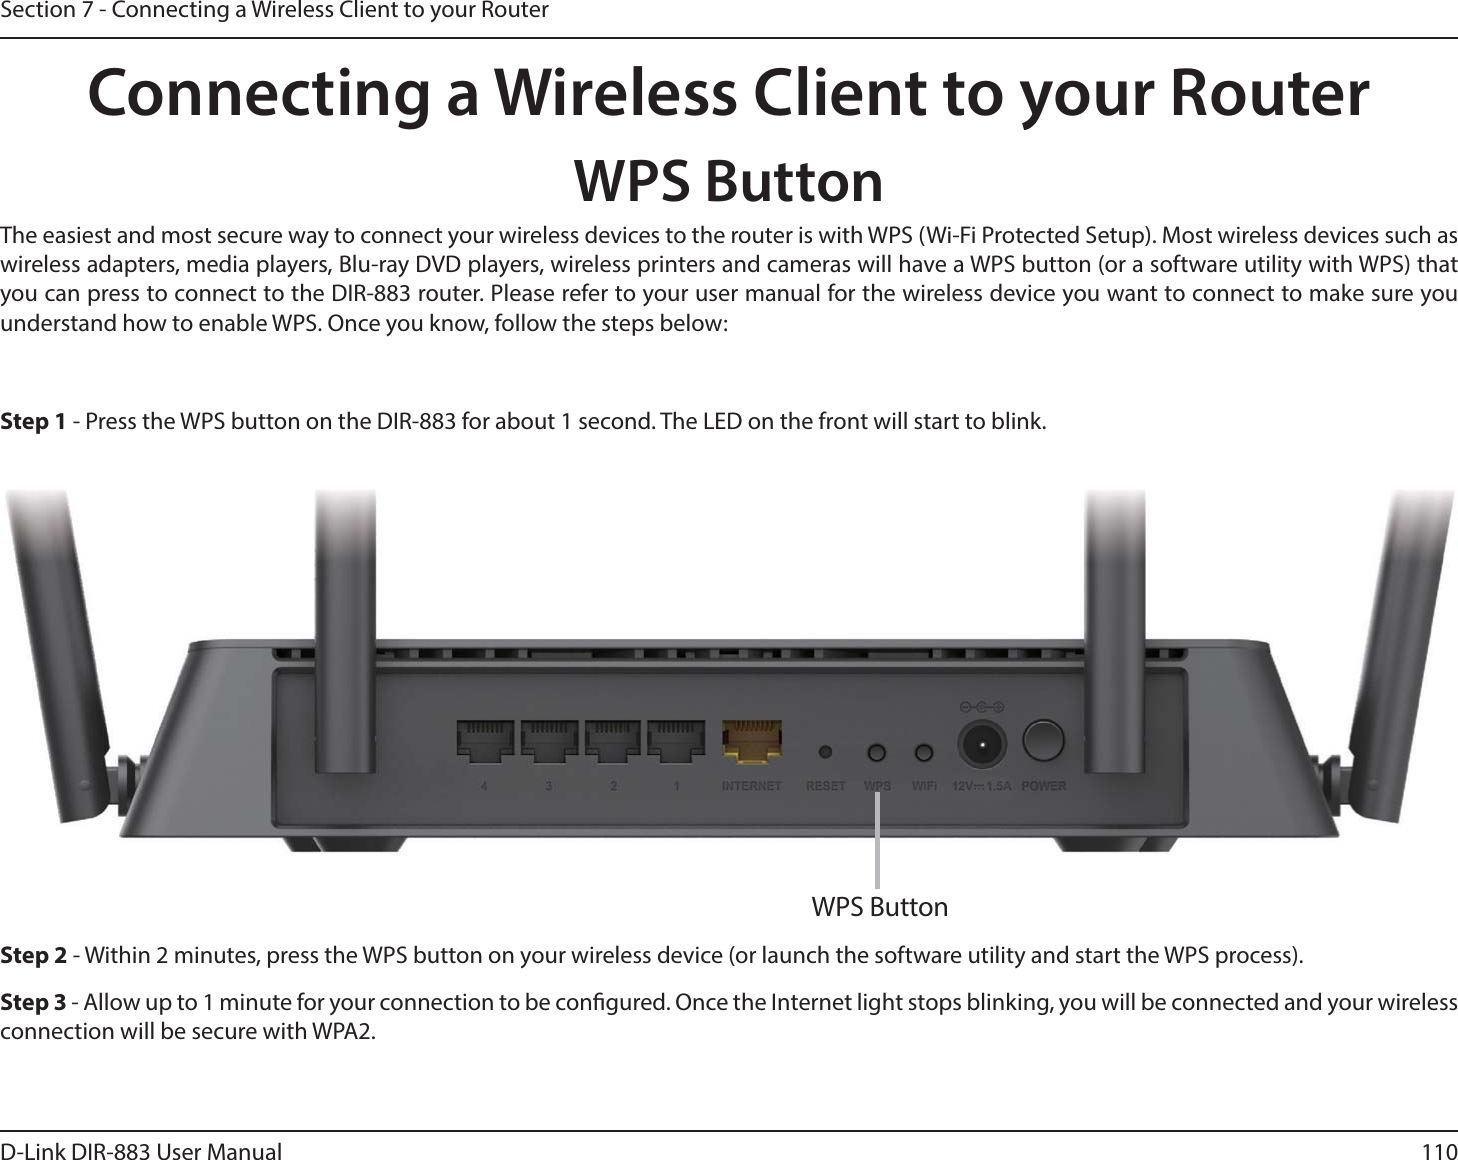 110D-Link DIR-883 User ManualSection 7 - Connecting a Wireless Client to your RouterConnecting a Wireless Client to your RouterWPS ButtonStep 2 - Within 2 minutes, press the WPS button on your wireless device (or launch the software utility and start the WPS process).The easiest and most secure way to connect your wireless devices to the router is with WPS (Wi-Fi Protected Setup). Most wireless devices such as wireless adapters, media players, Blu-ray DVD players, wireless printers and cameras will have a WPS button (or a software utility with WPS) that you can press to connect to the DIR-883 router. Please refer to your user manual for the wireless device you want to connect to make sure you understand how to enable WPS. Once you know, follow the steps below:Step 1 - Press the WPS button on the DIR-883 for about 1 second. The LED on the front will start to blink.Step 3 - Allow up to 1 minute for your connection to be congured. Once the Internet light stops blinking, you will be connected and your wireless connection will be secure with WPA2.WPS Button